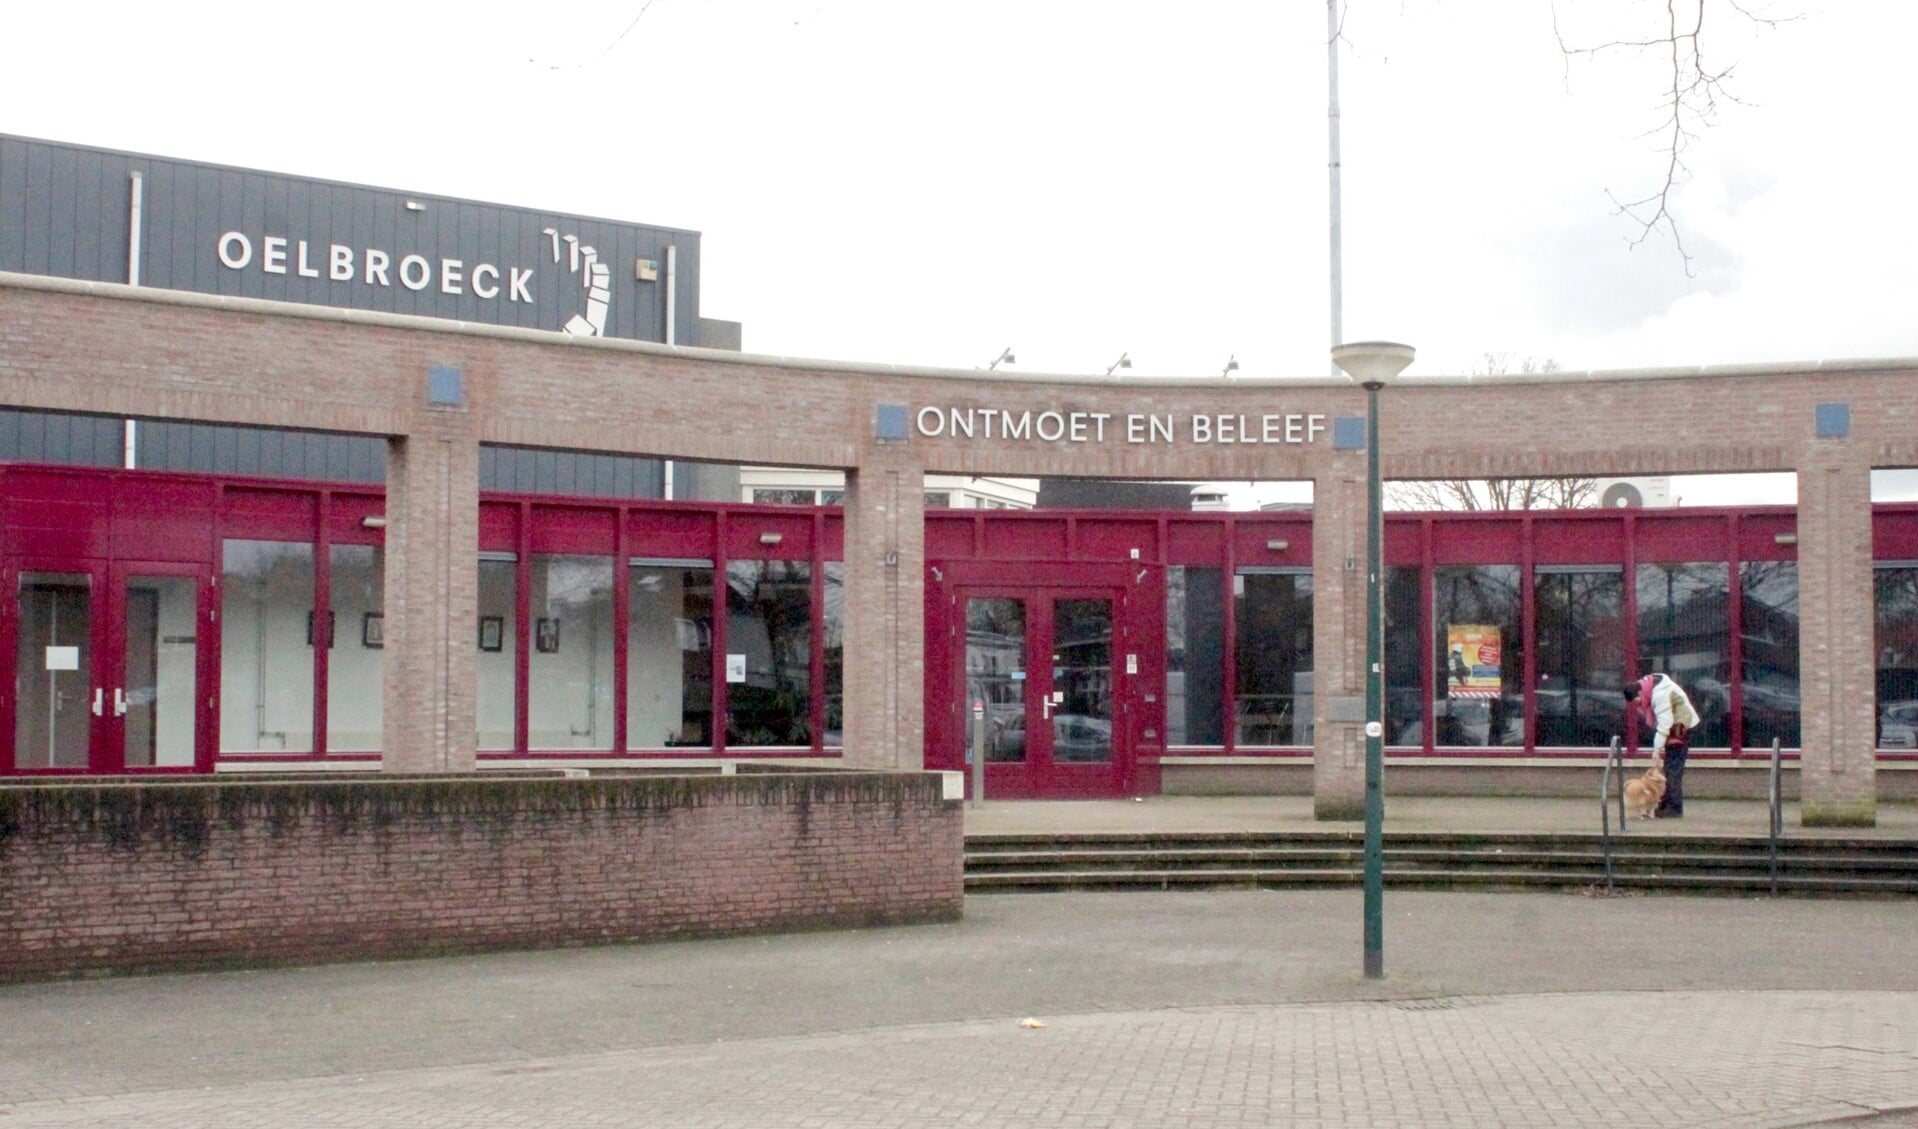 Oelbroeck in Sint Anthonis.